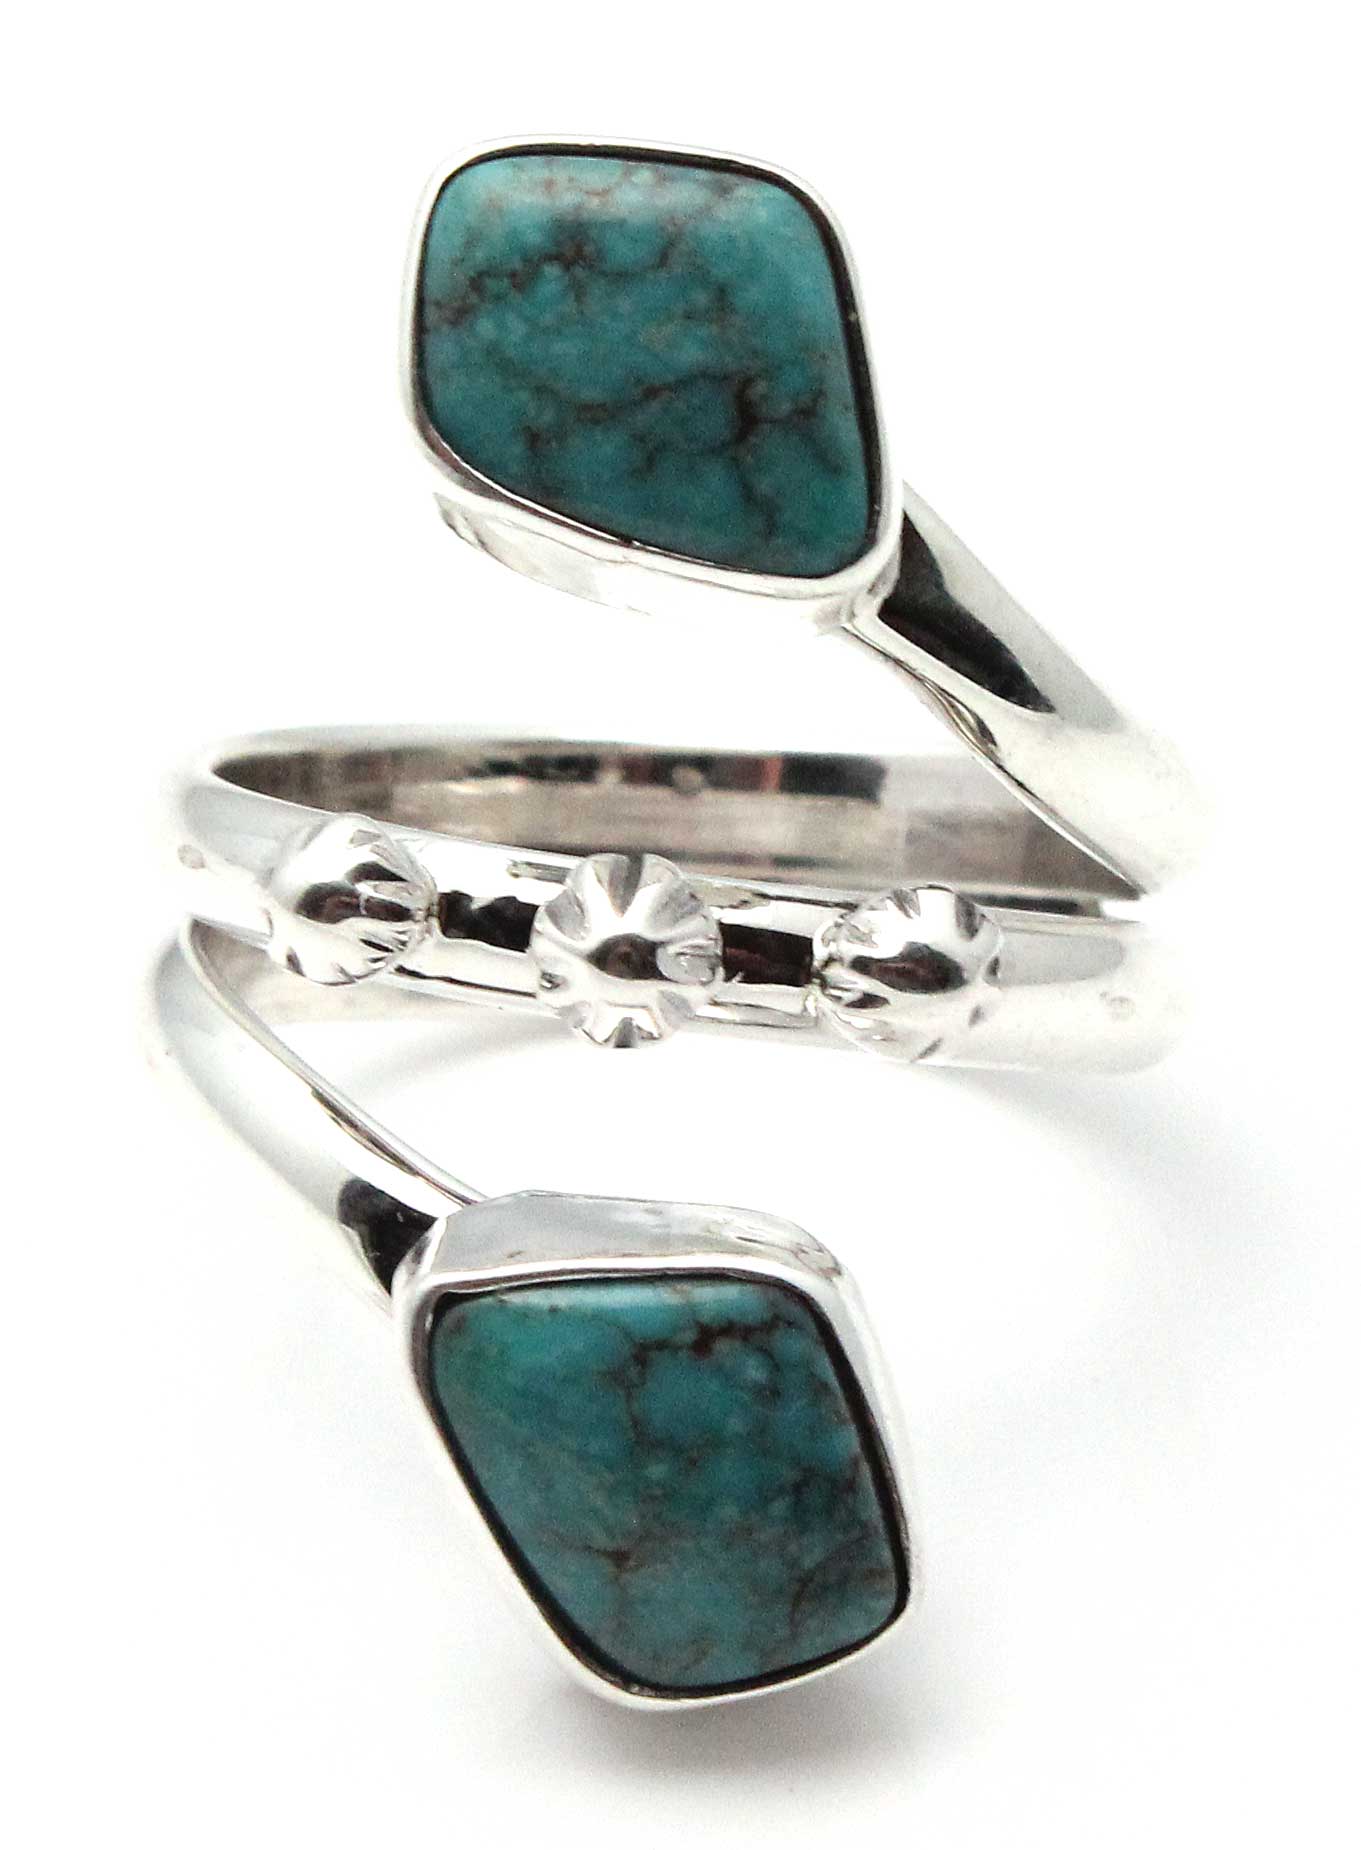 Sterling Silver and Turquoise Ring Size 6